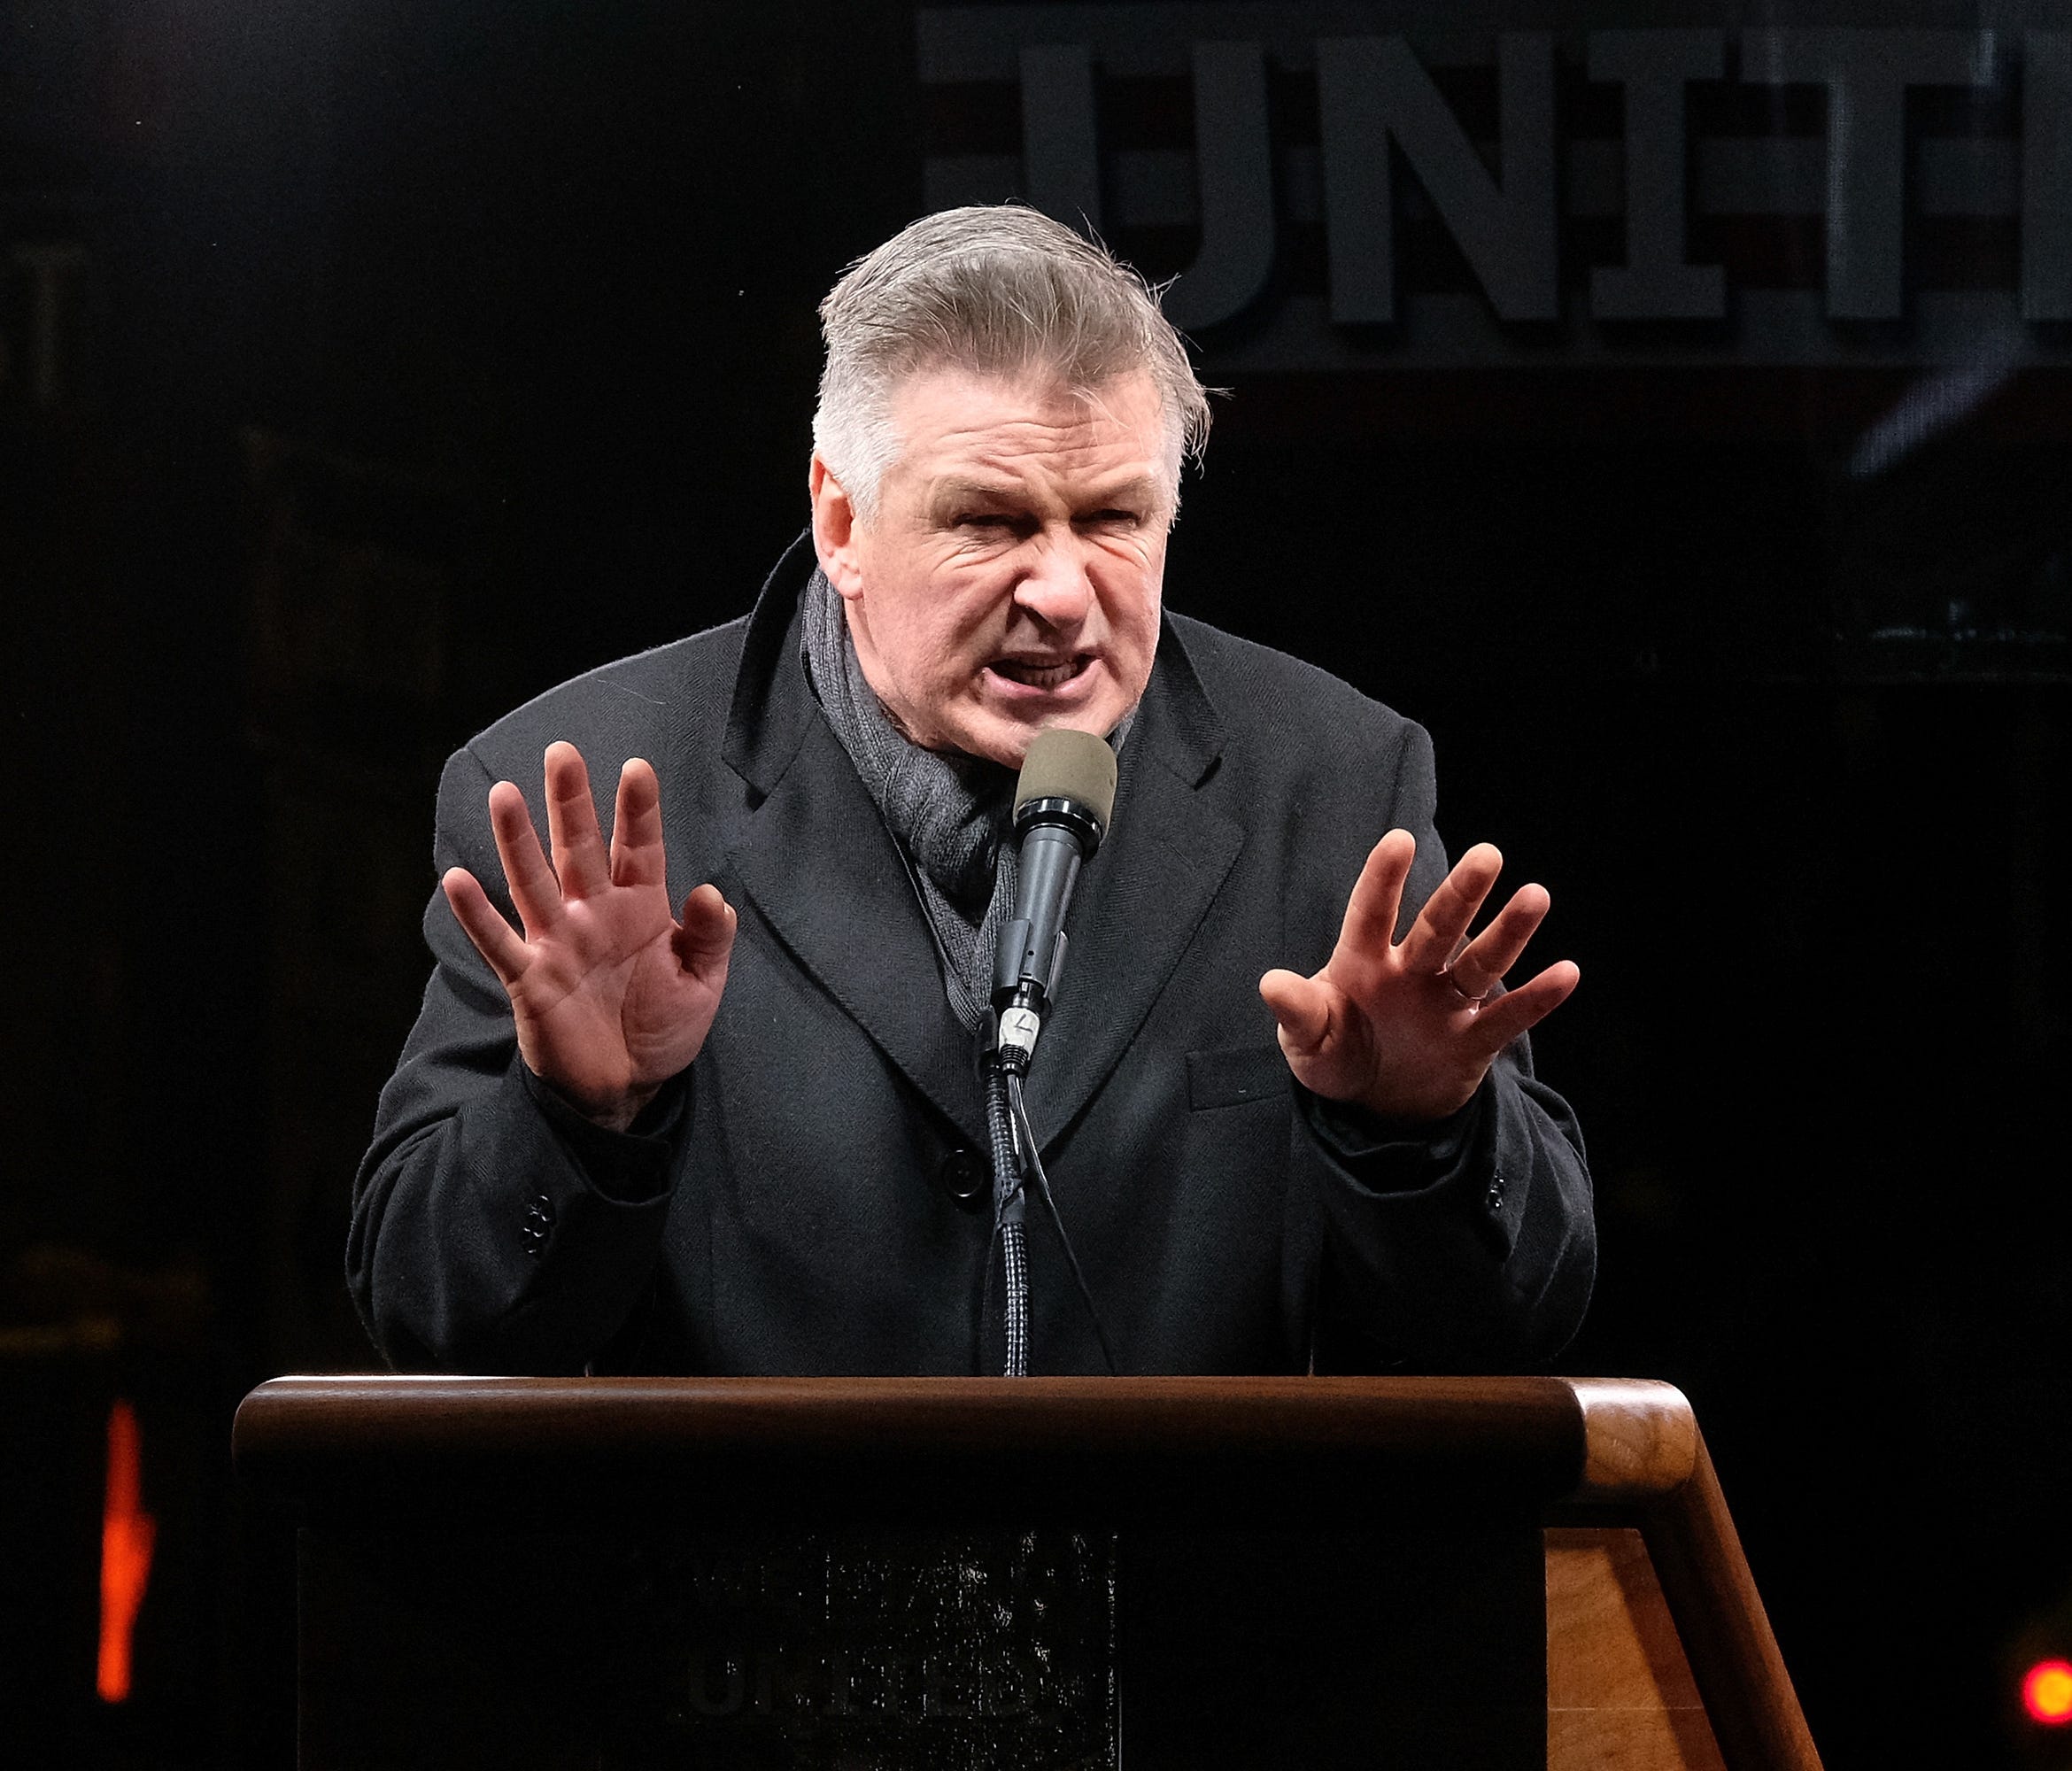 Alec Baldwin speaks onstage during the We Stand United NYC Rally outside Trump International Hotel & Tower on Jan. 19.